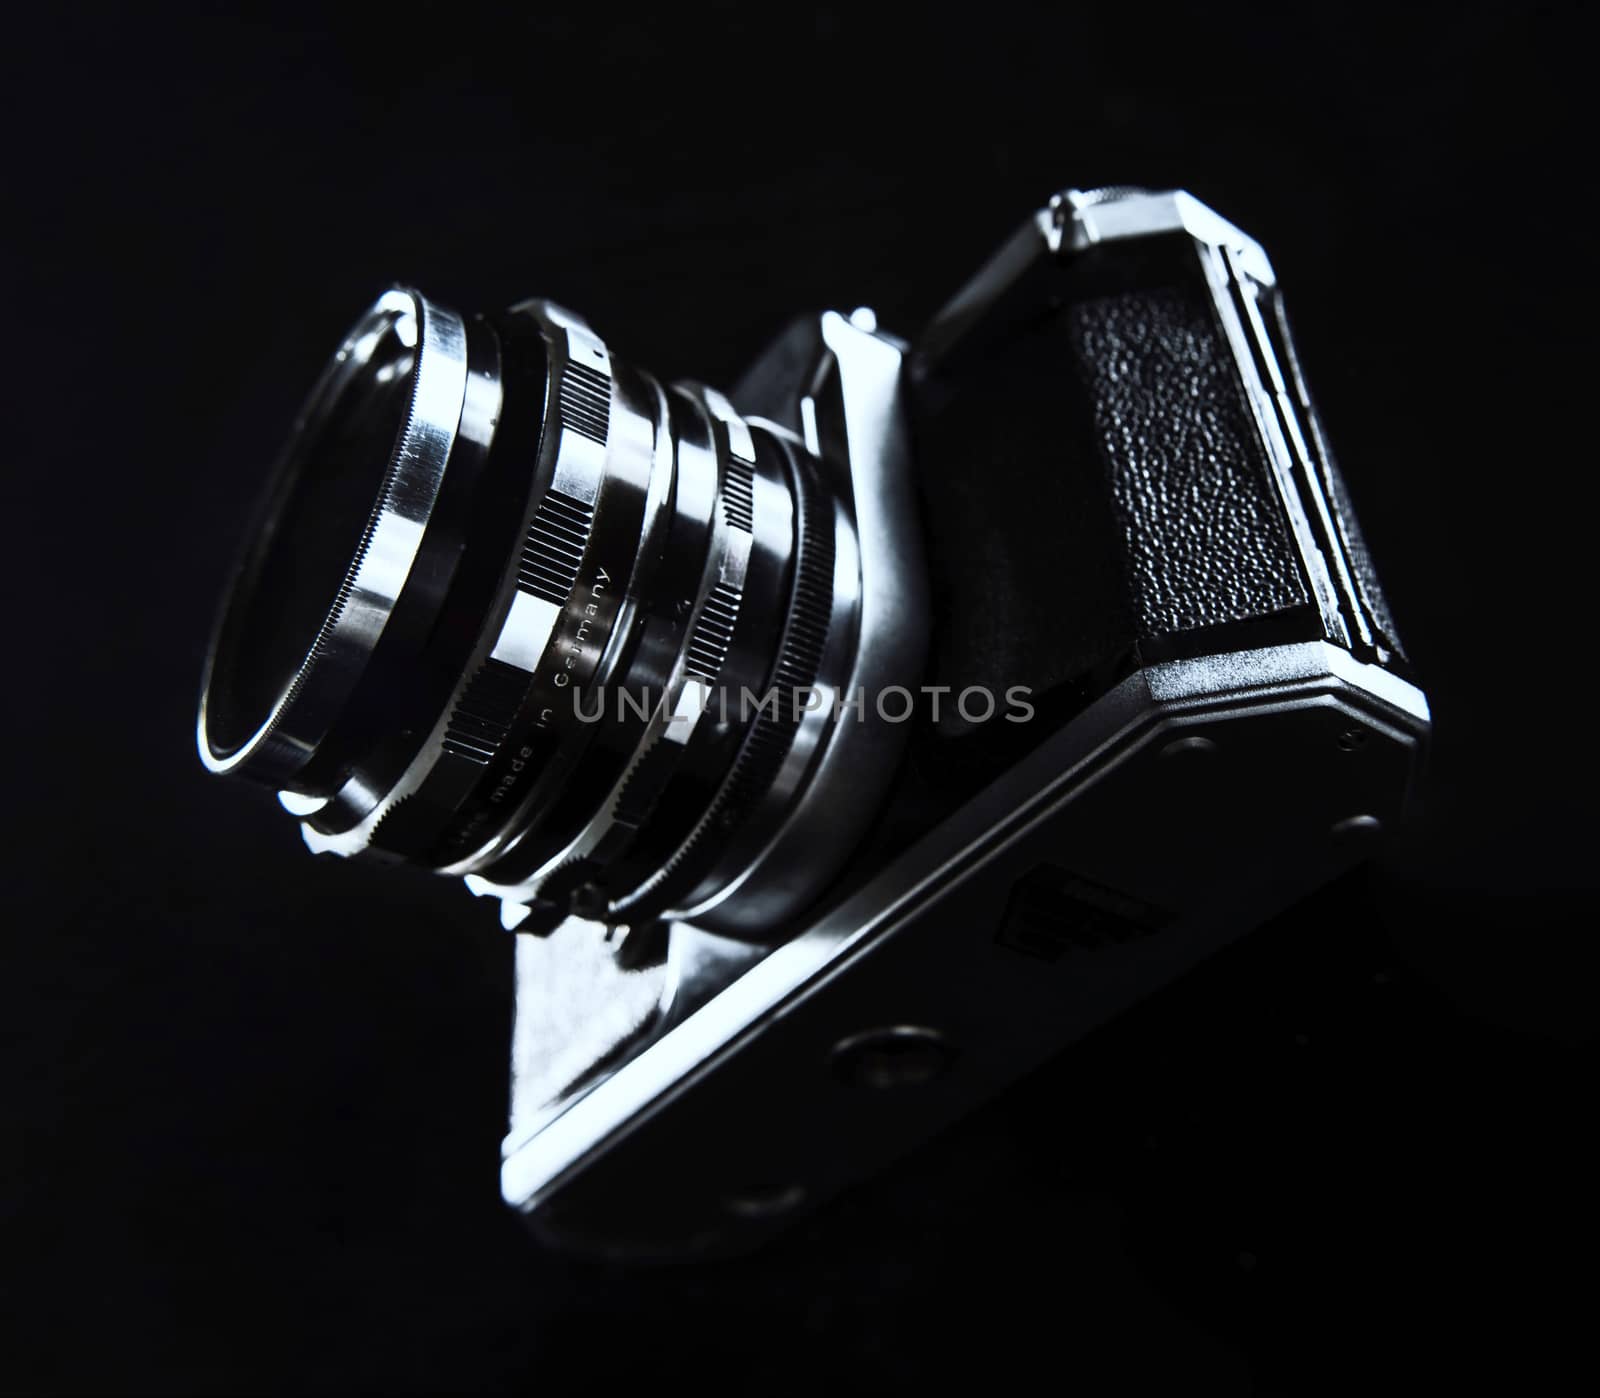 Black and silver Photo Camera standing on a glass pane